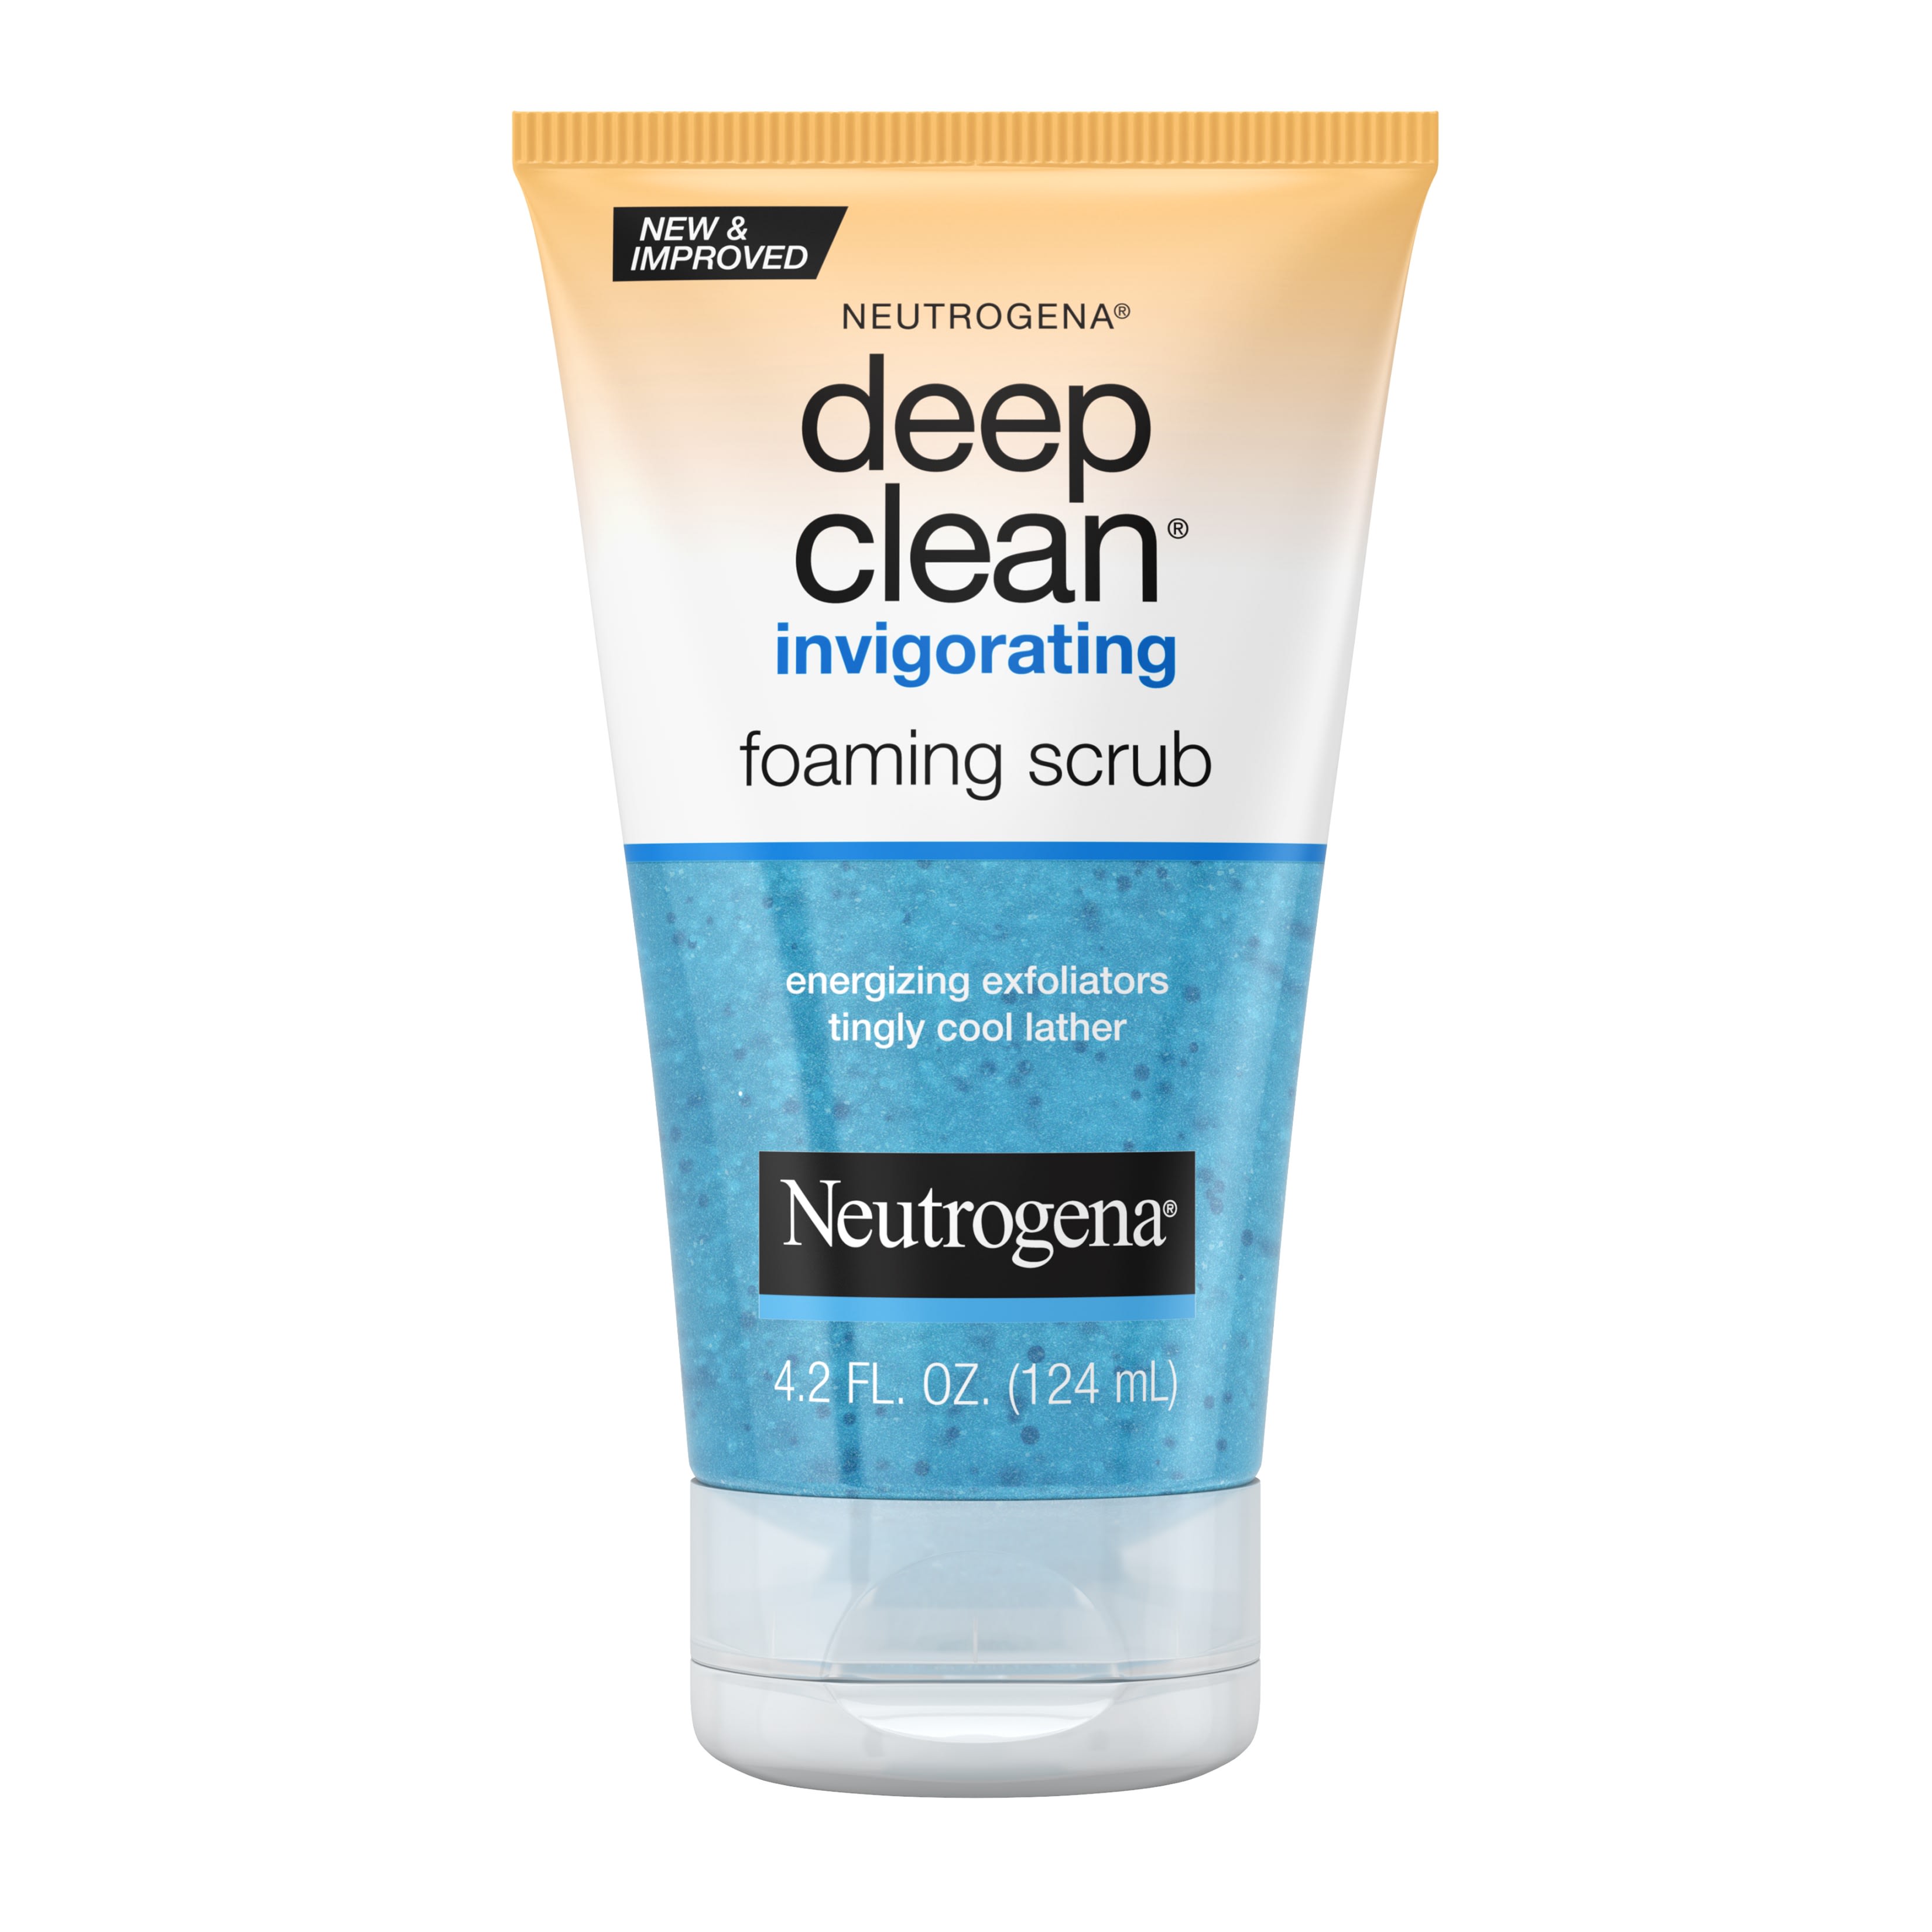 Neutrogena Deep Clean Invigorating Foaming Facial Scrub with Glycerin, Cooling & Exfoliating Gel Face Wash to Remove Dirt, Oil & Makeup, 4.2 fl. oz | MTTS281